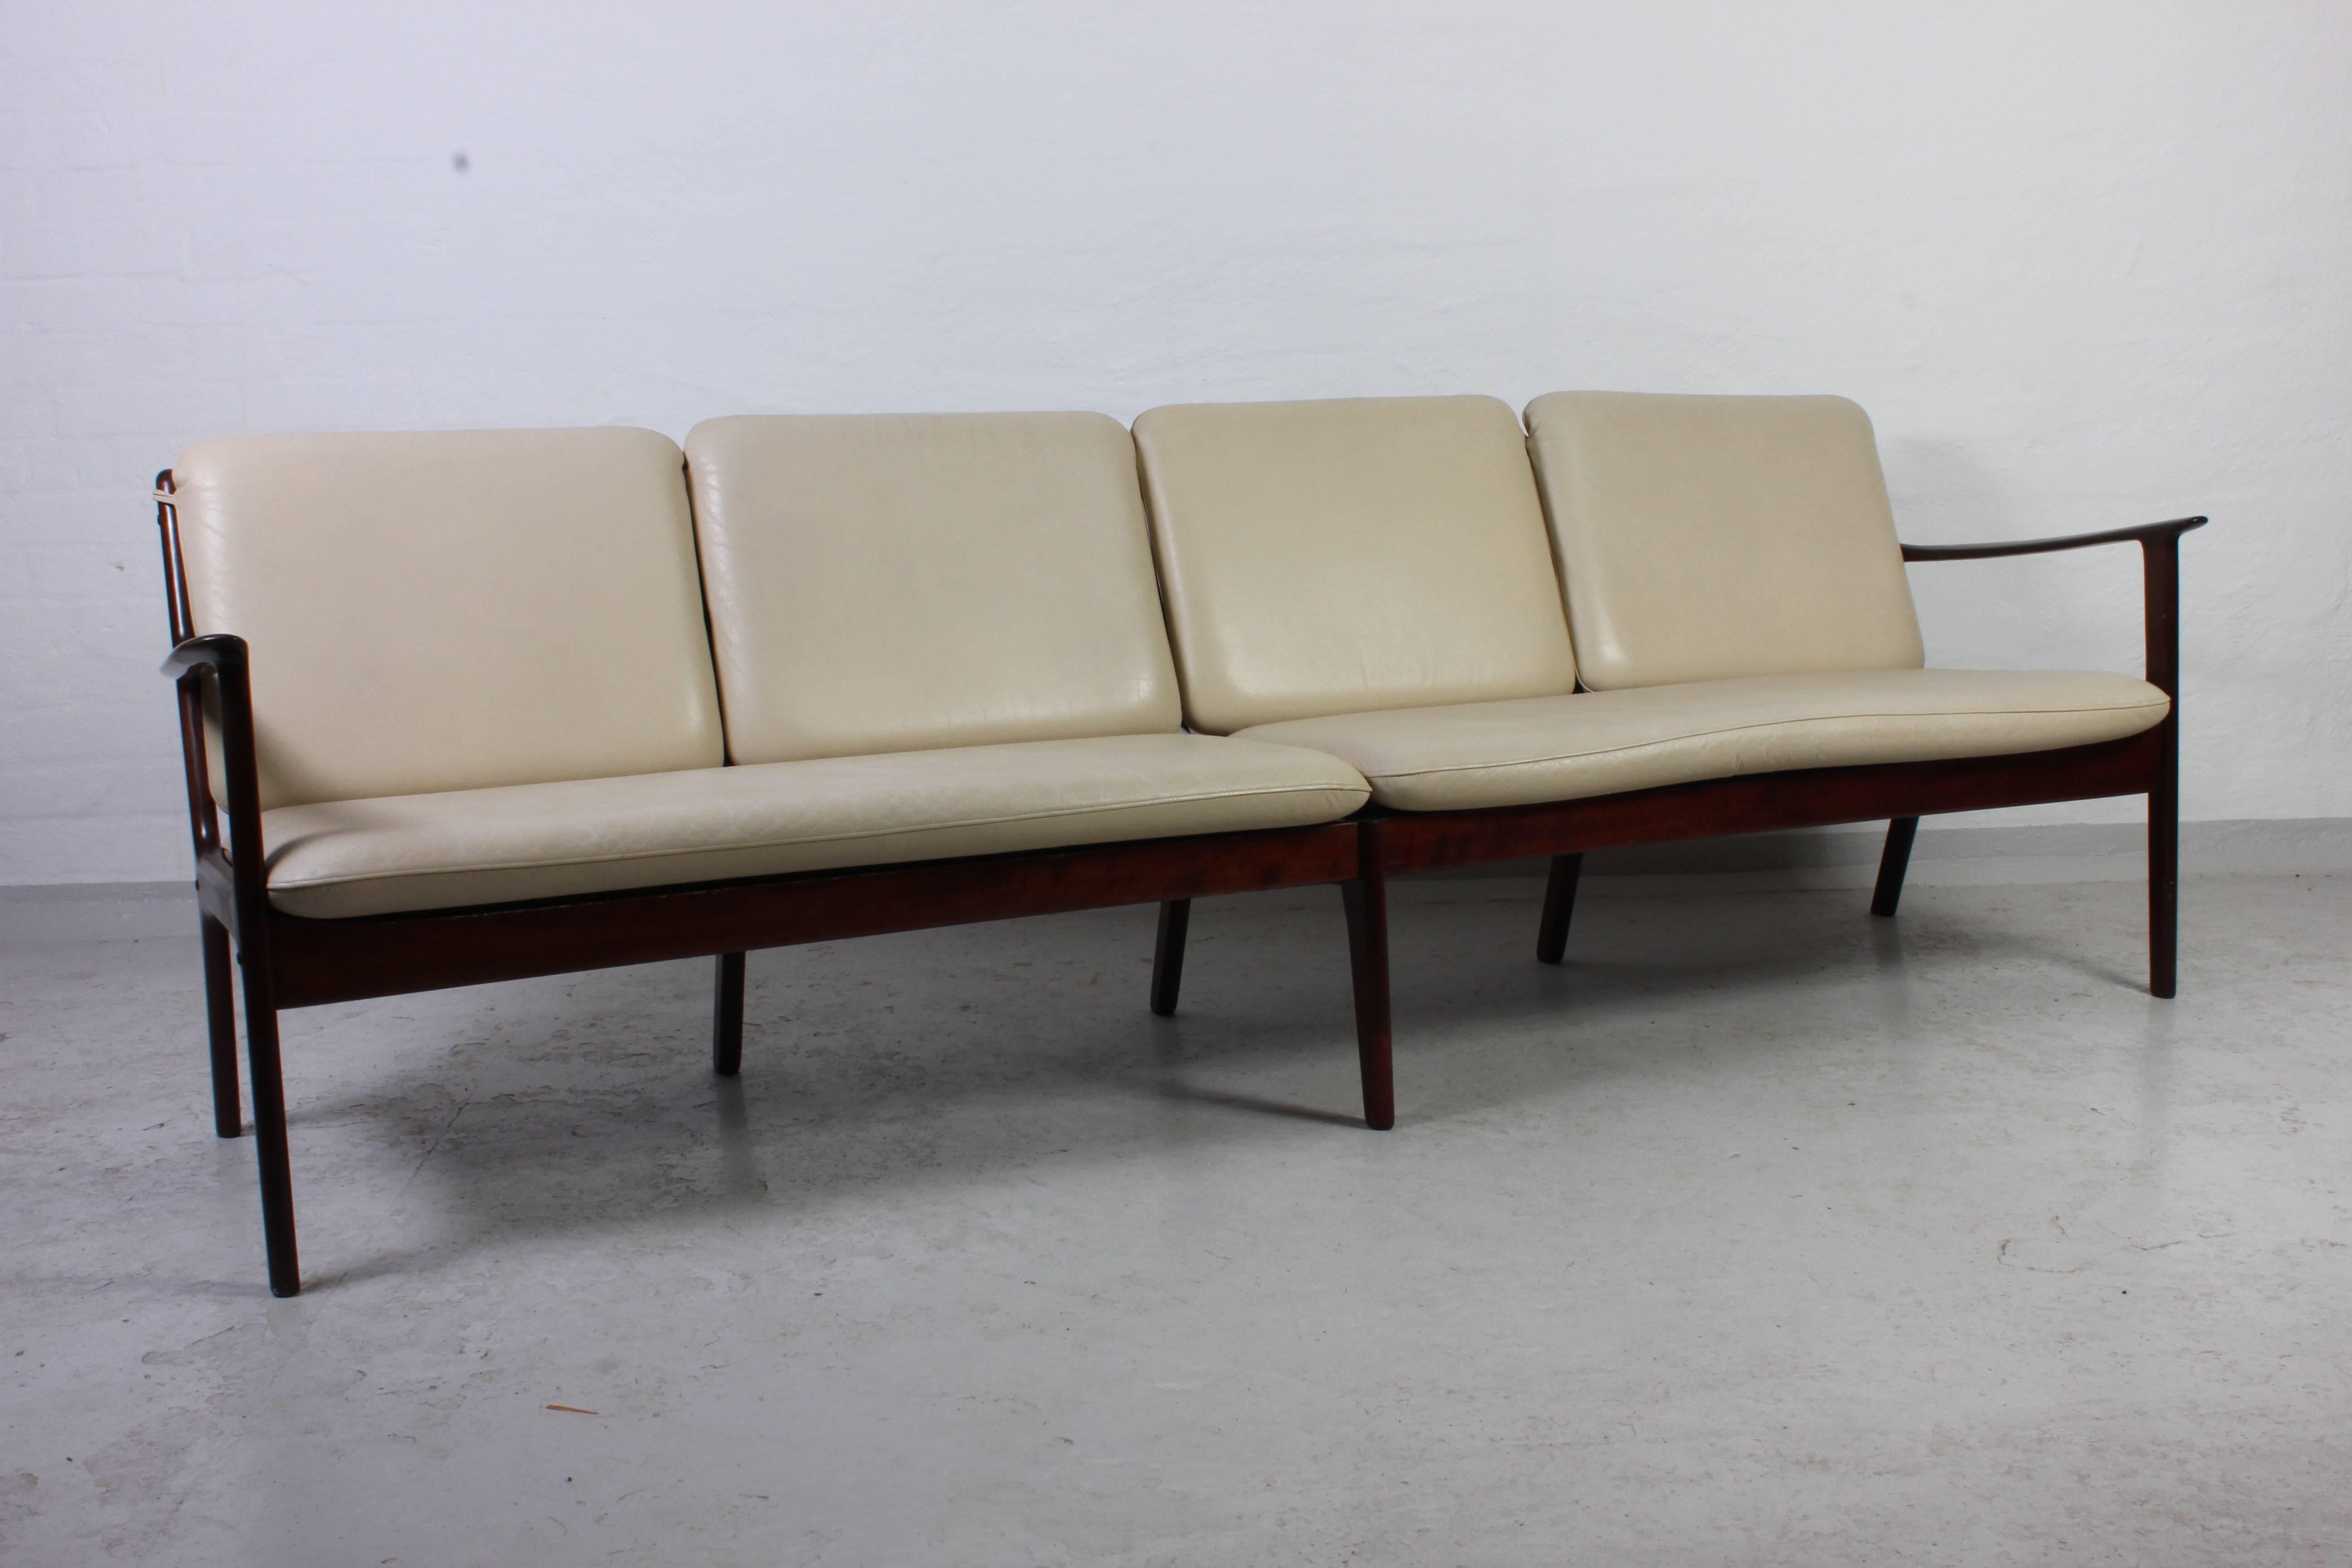 Midcentury four-seat sofa and lounge chair by famous Danish designer Ole Wanscher. This mahogany sofa set was produced by Poul Jeppesen in the 1950s. Sofa and chair has original skai upholstery in good vintage condition. The wooden frames is in very